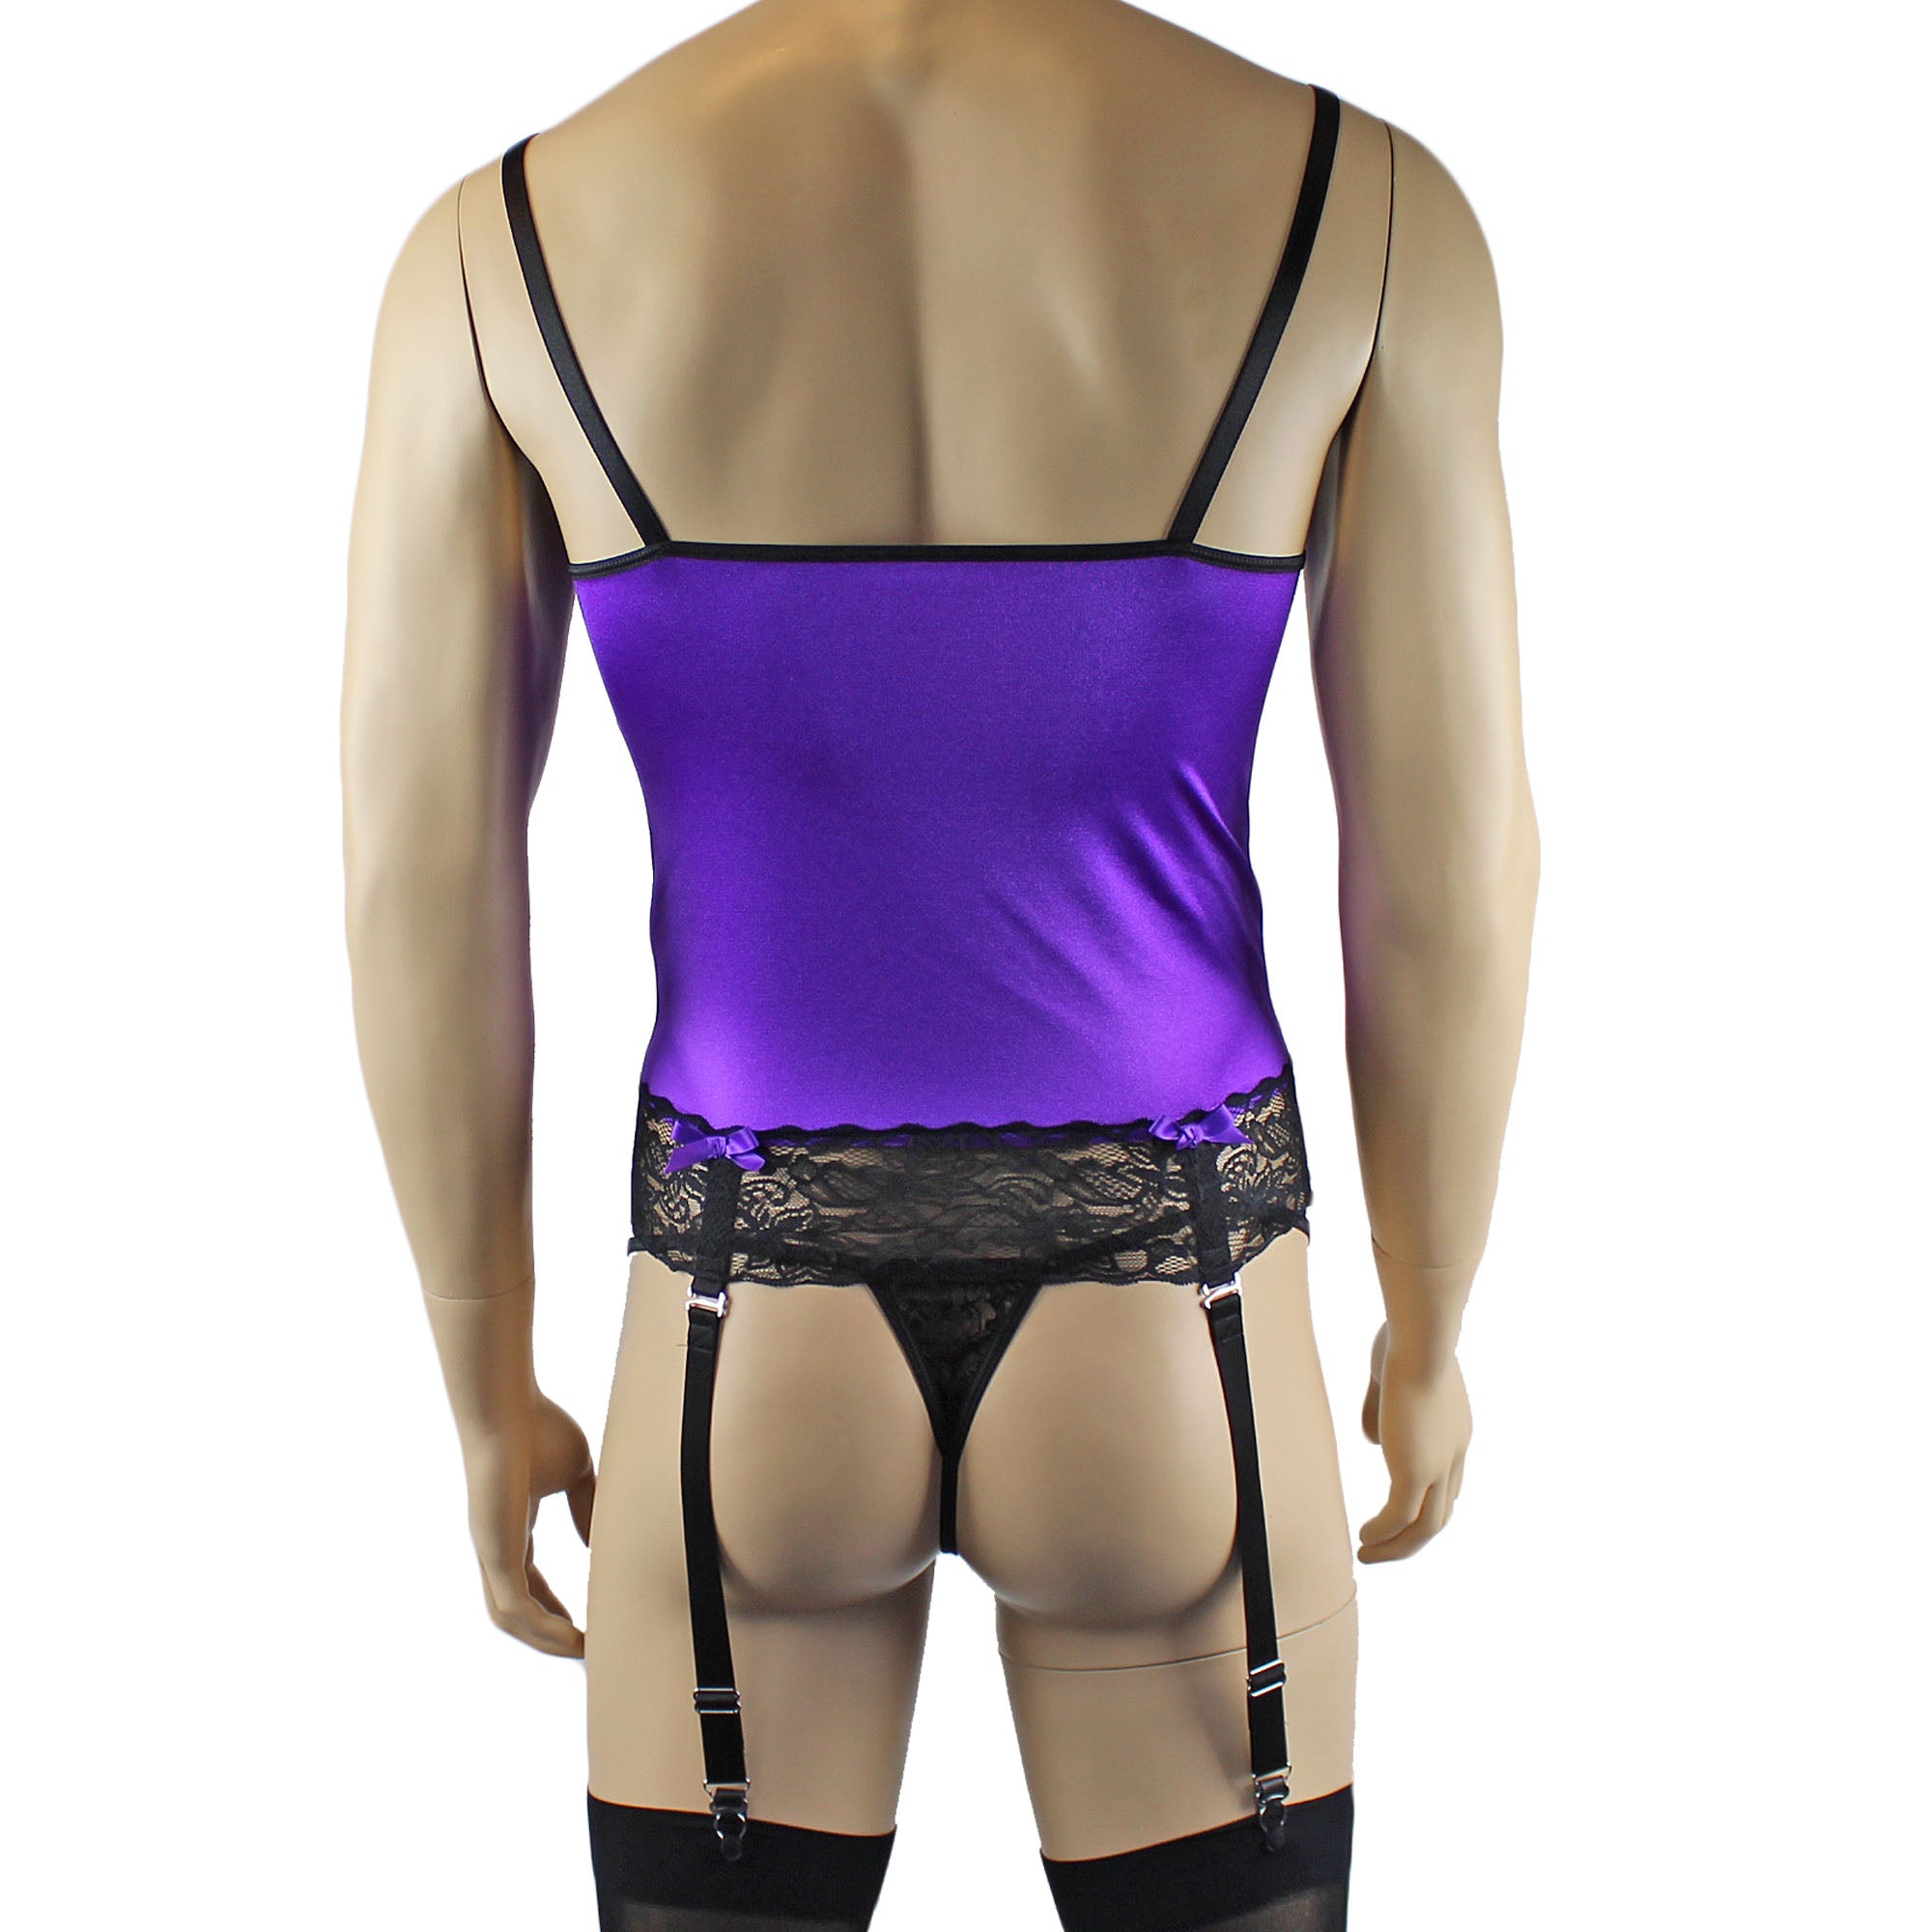 Mens Joanne Camisole Bustier Garter Top with Pouch G string & Stockings - Sizes up to 3XL Purple and Black Lace